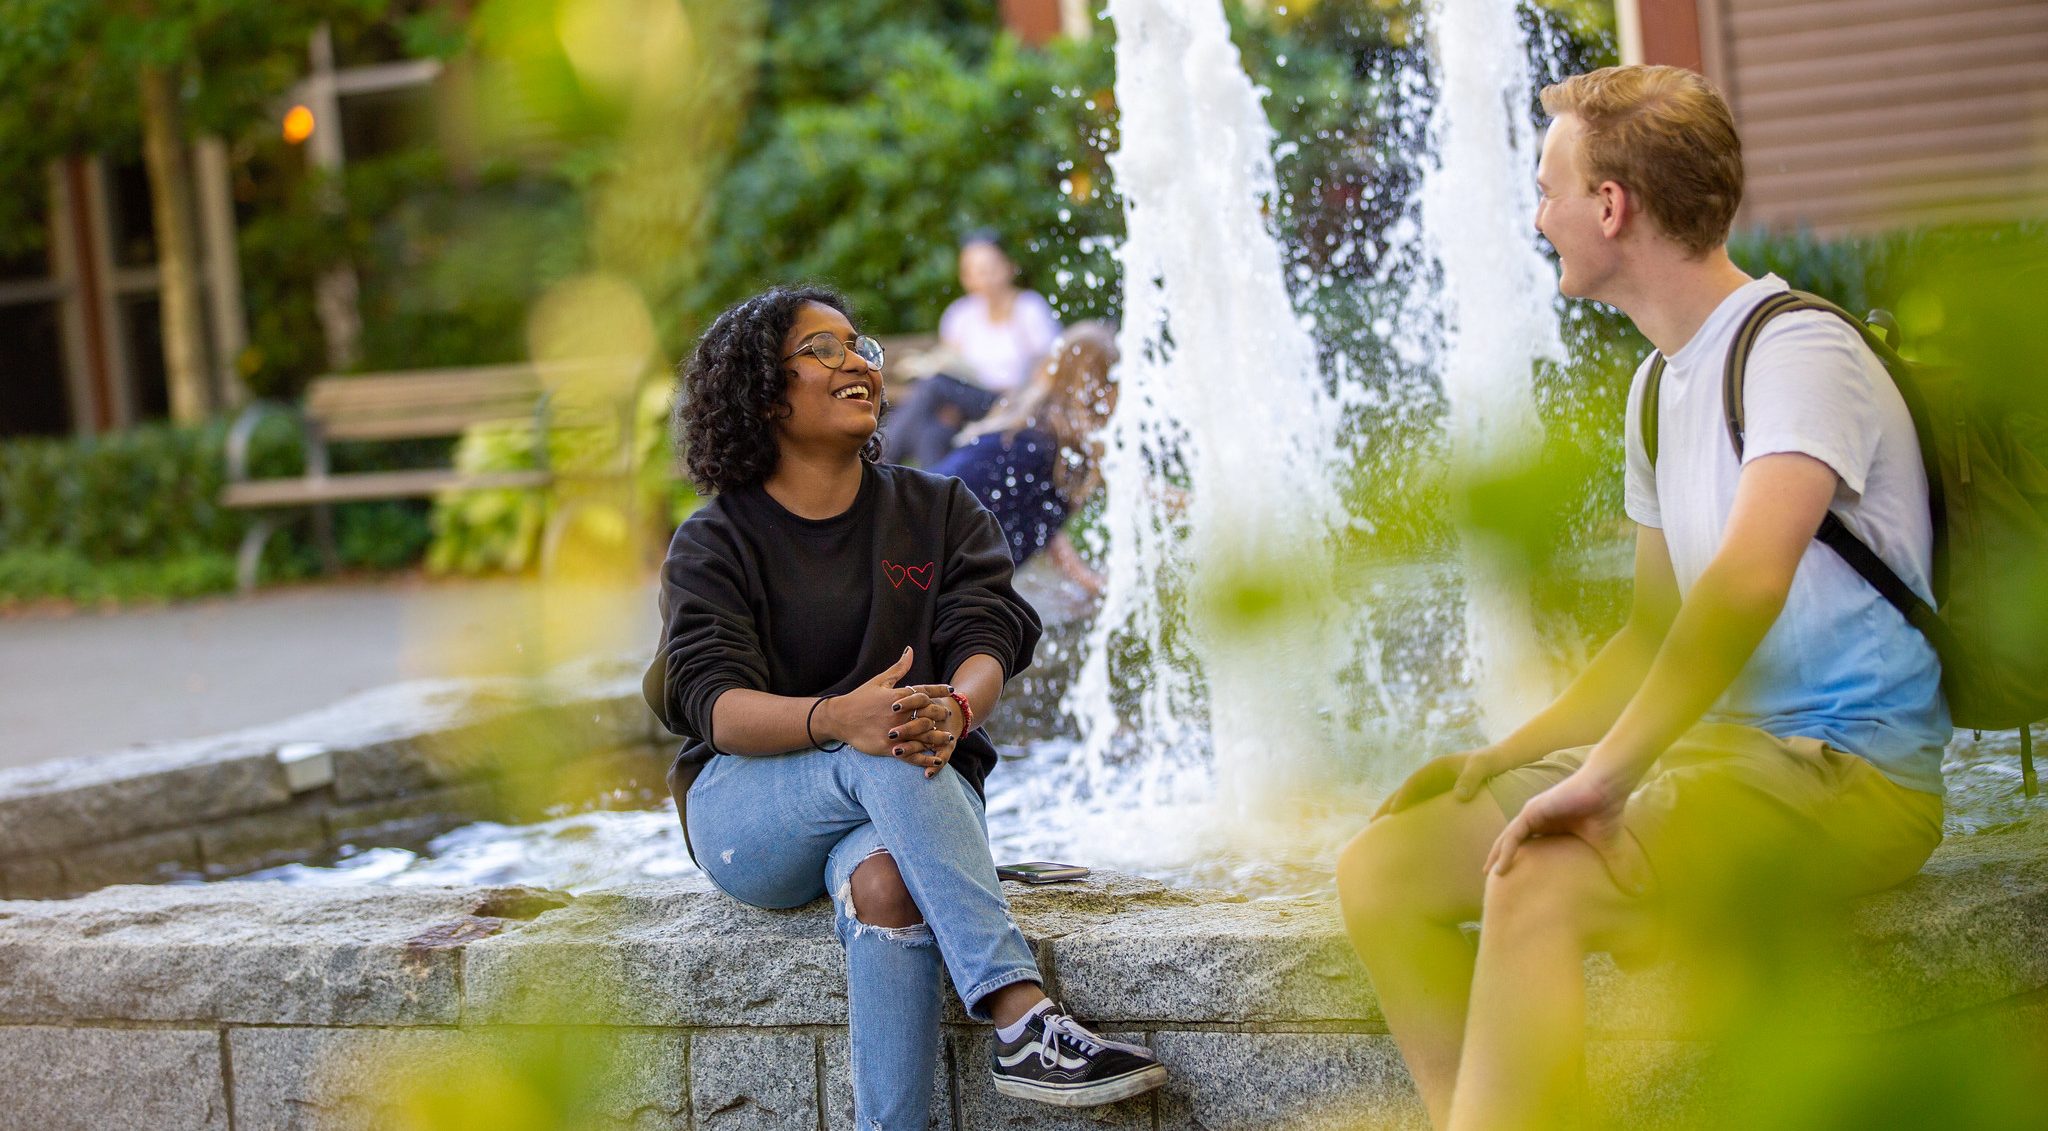 Two students sitting in front of a water fountain talking animatedly.